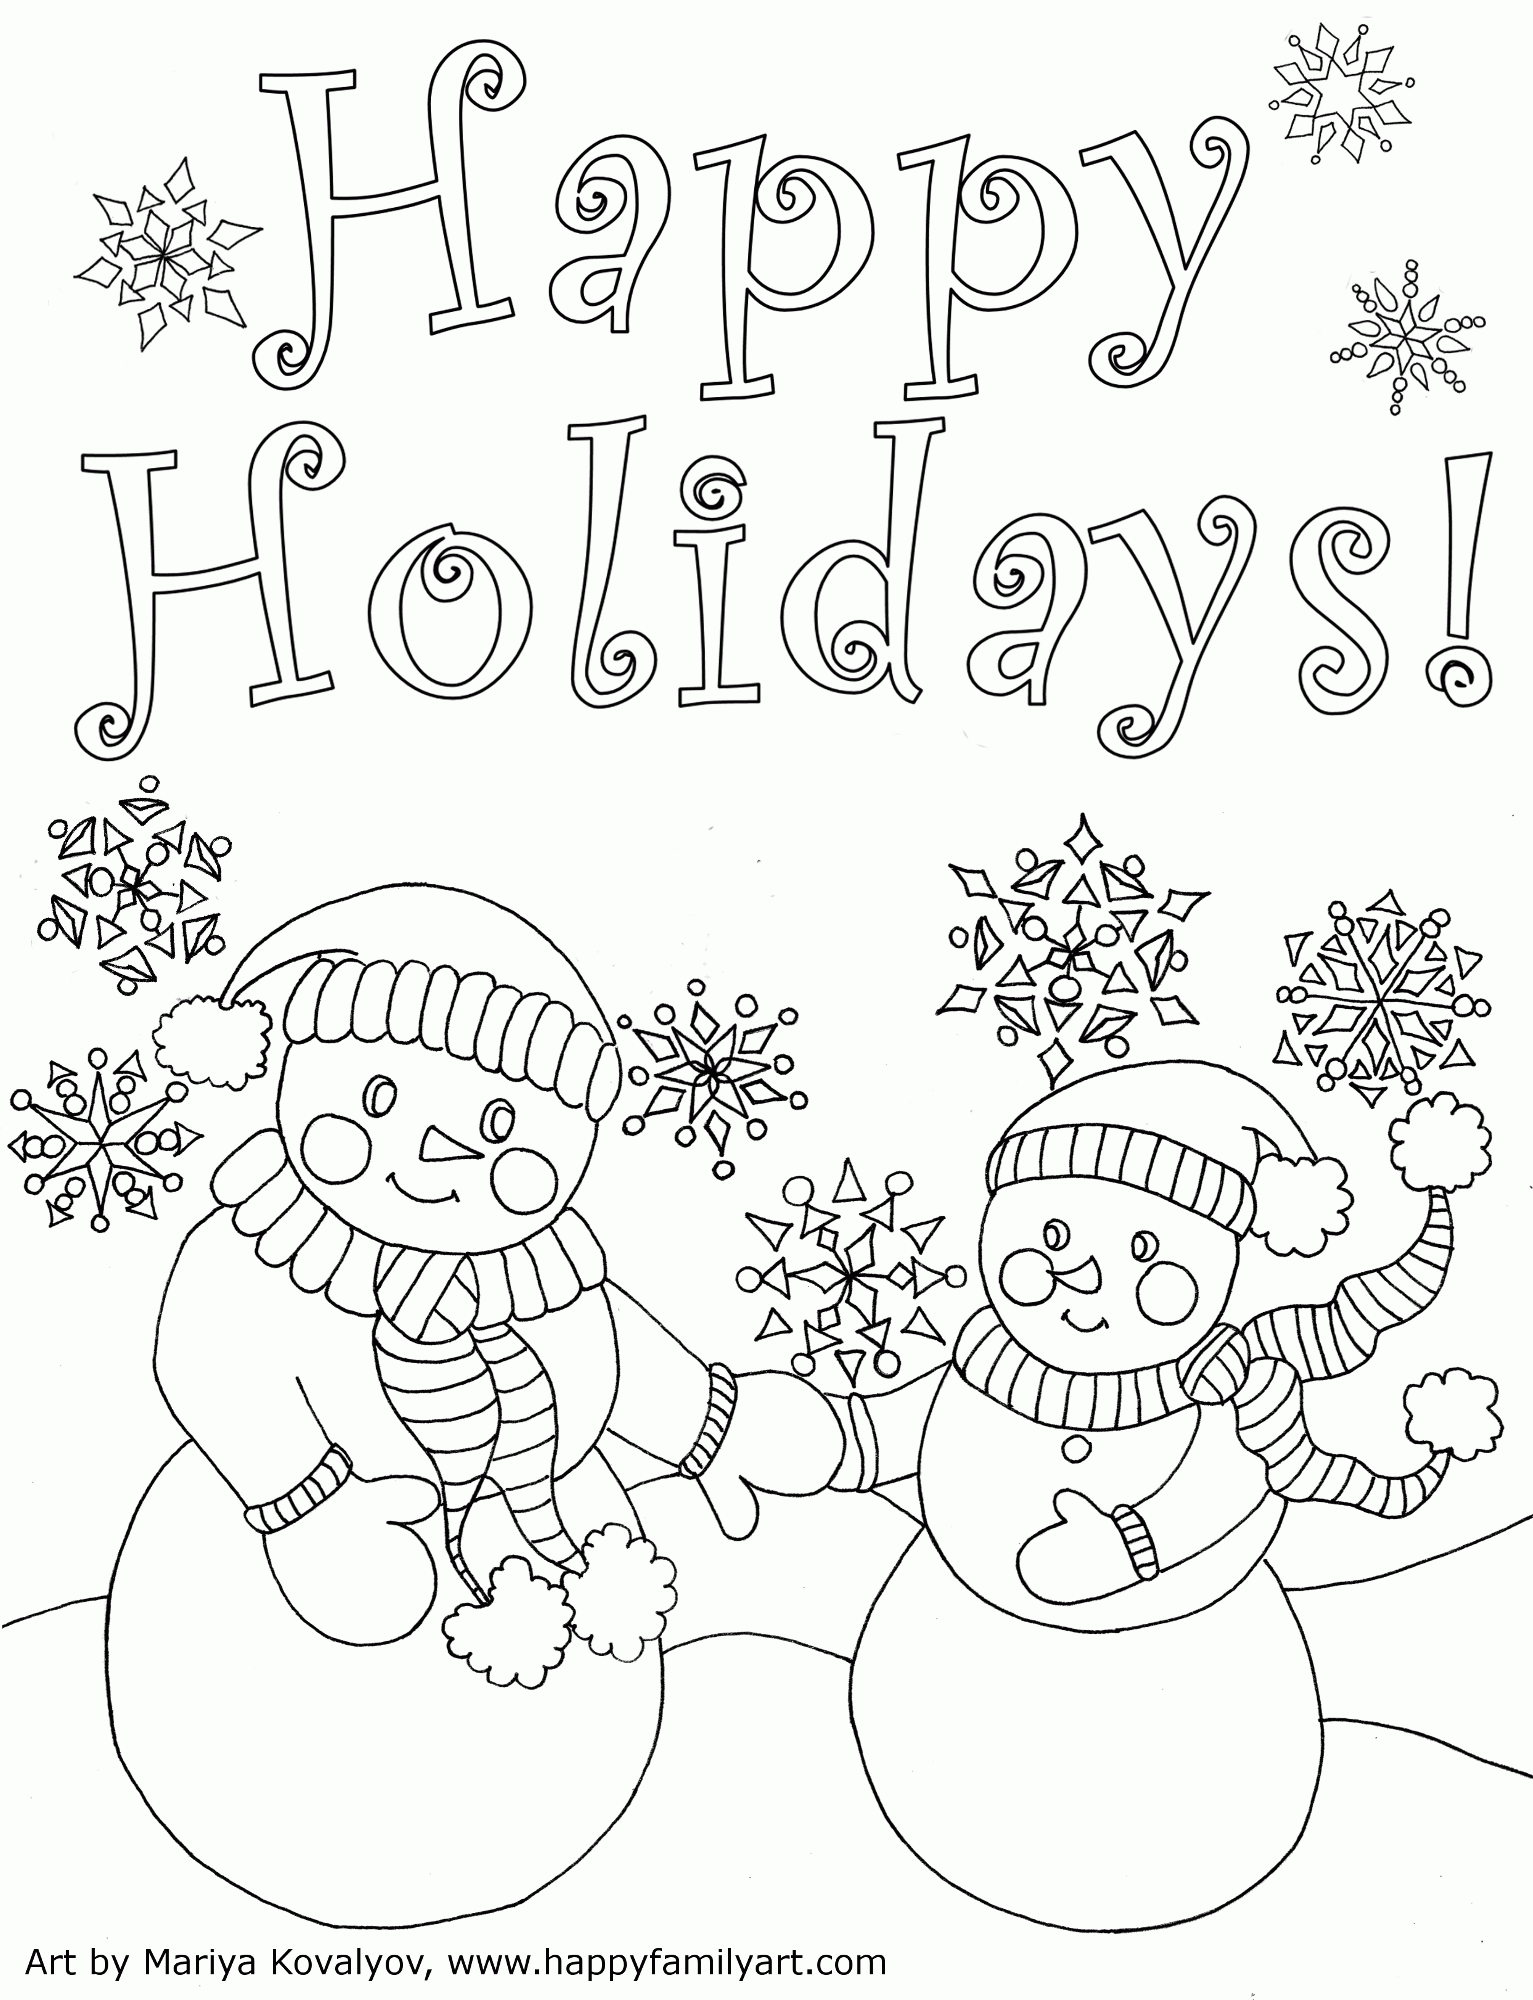 Holidays Coloring Page